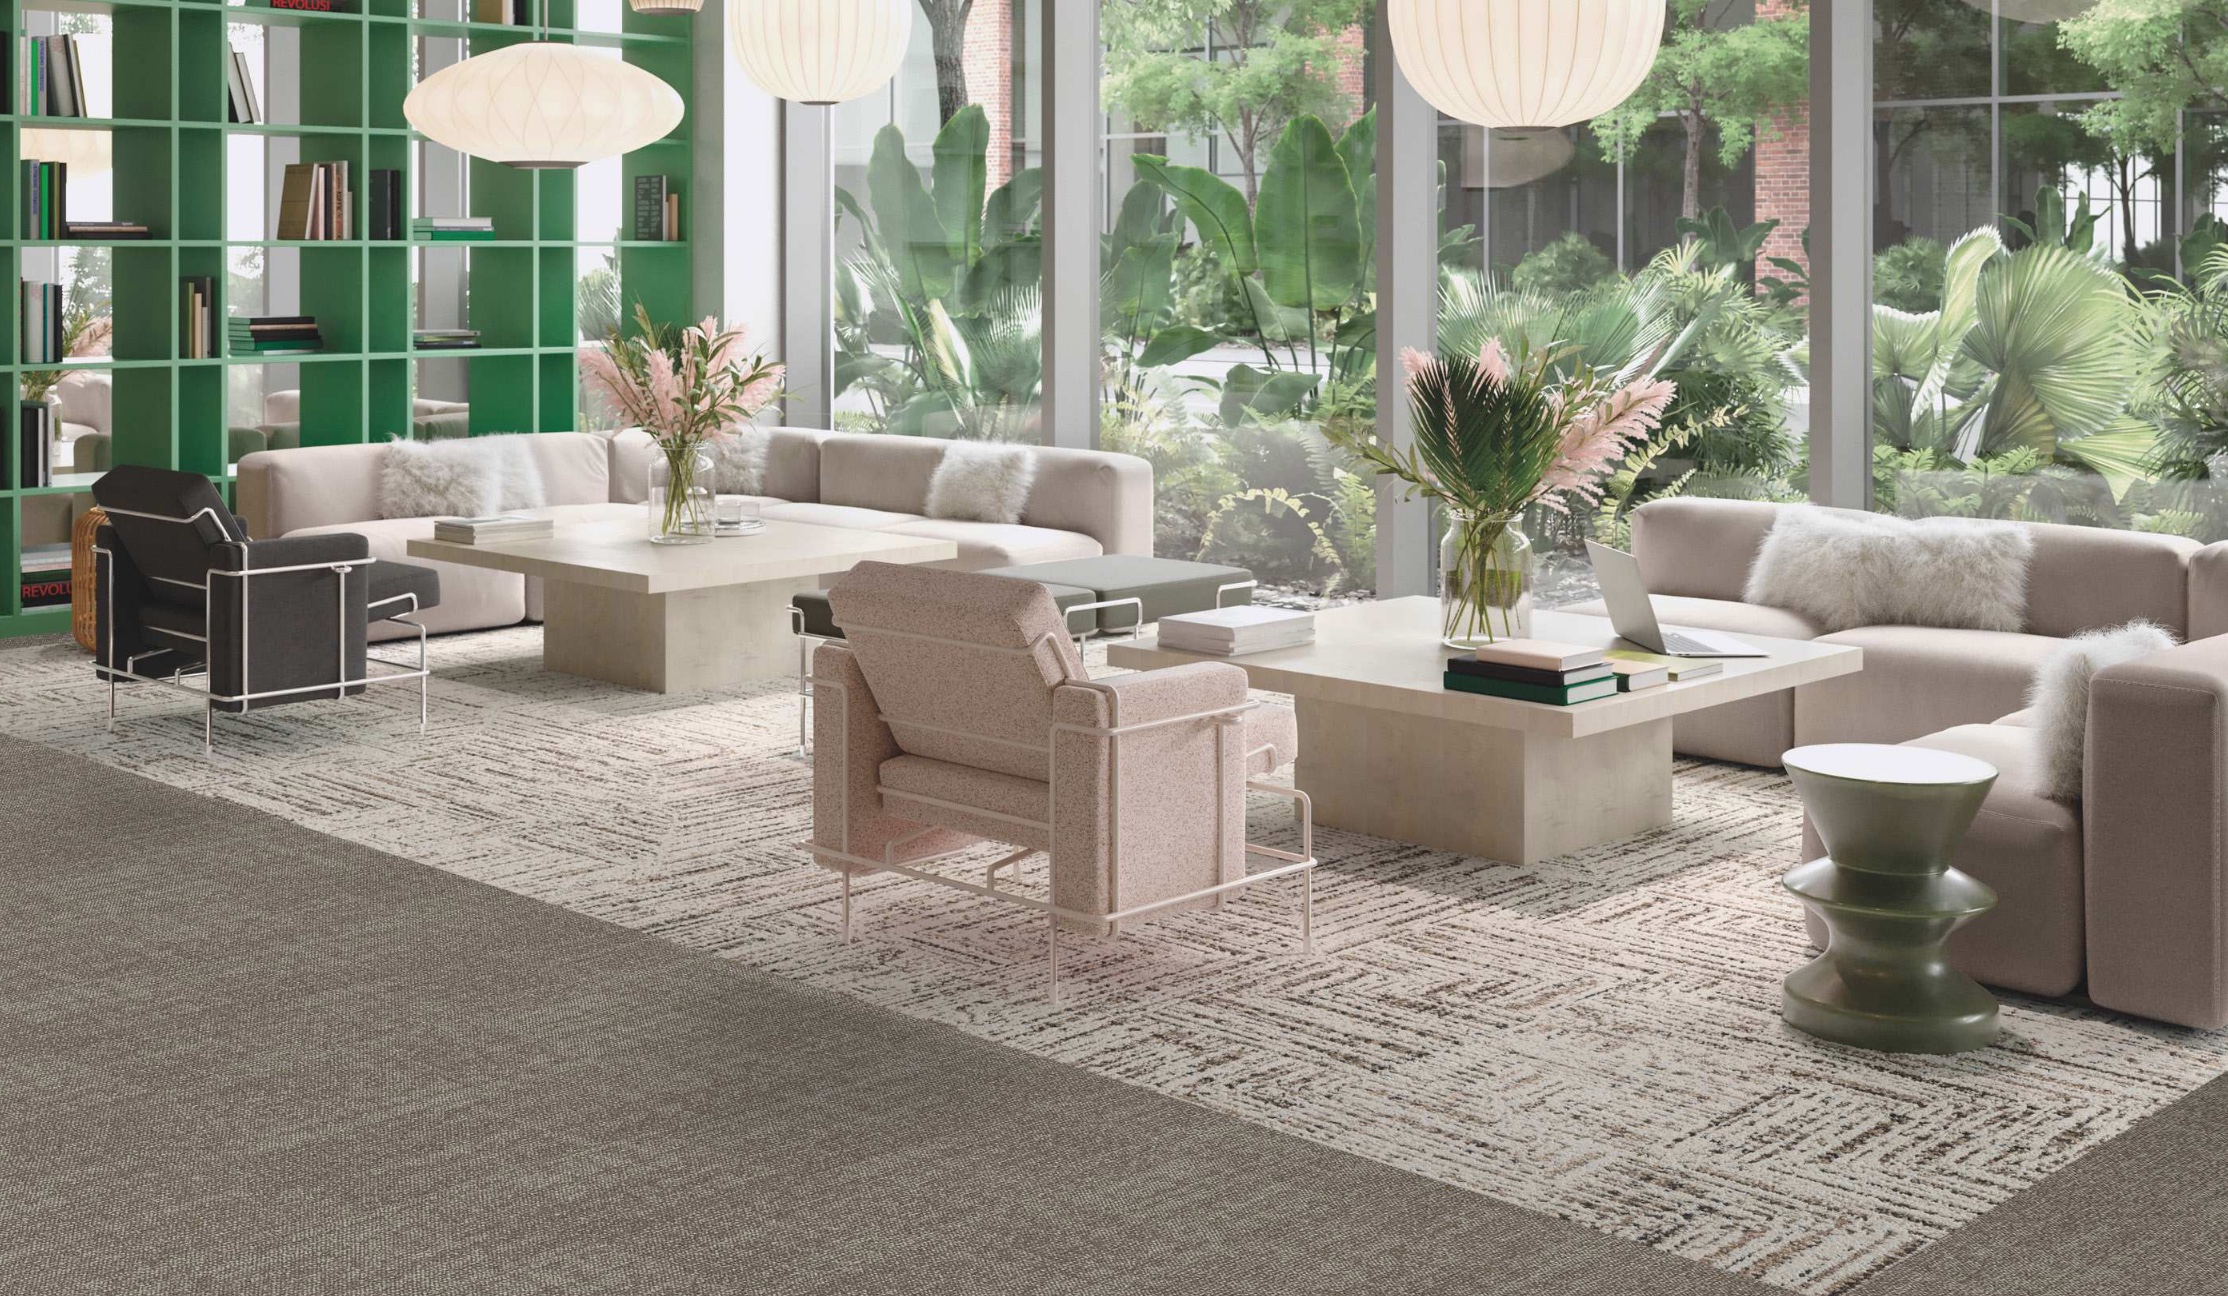 At NeoCon 2021: Five Faves for Fabulous Flooring